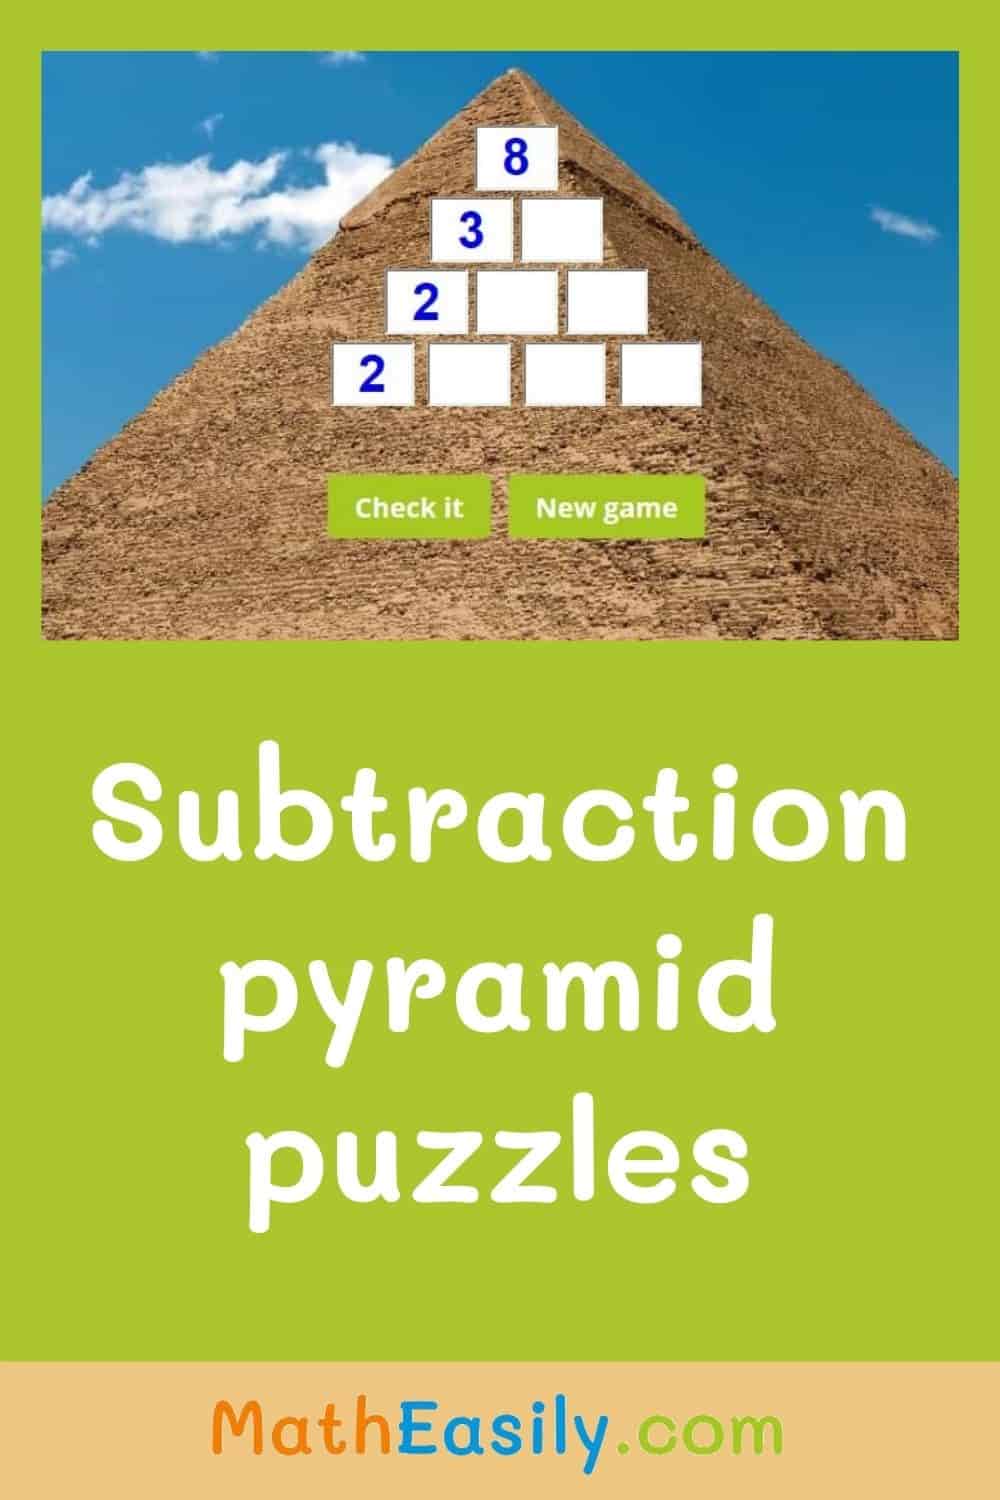 Subtraction pyramid puzzle game. Addition and subtraction pyramids. Subtraction pyramid games. pyramid addition and subtraction.